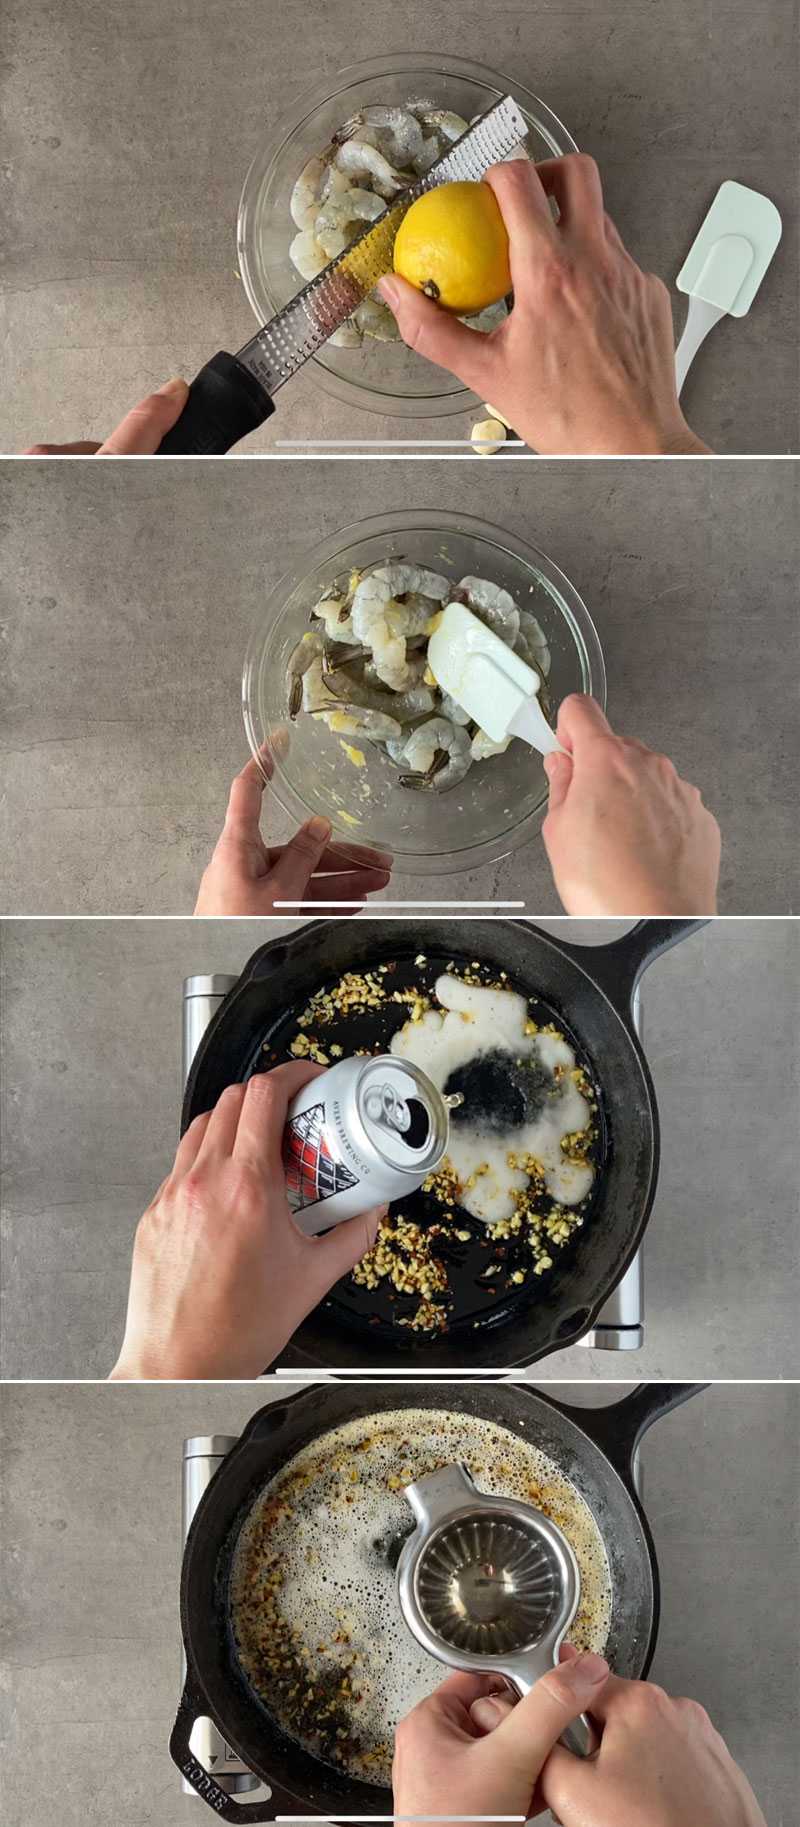 Process image sequence on how to cook beer shrimp skillet - part 1.